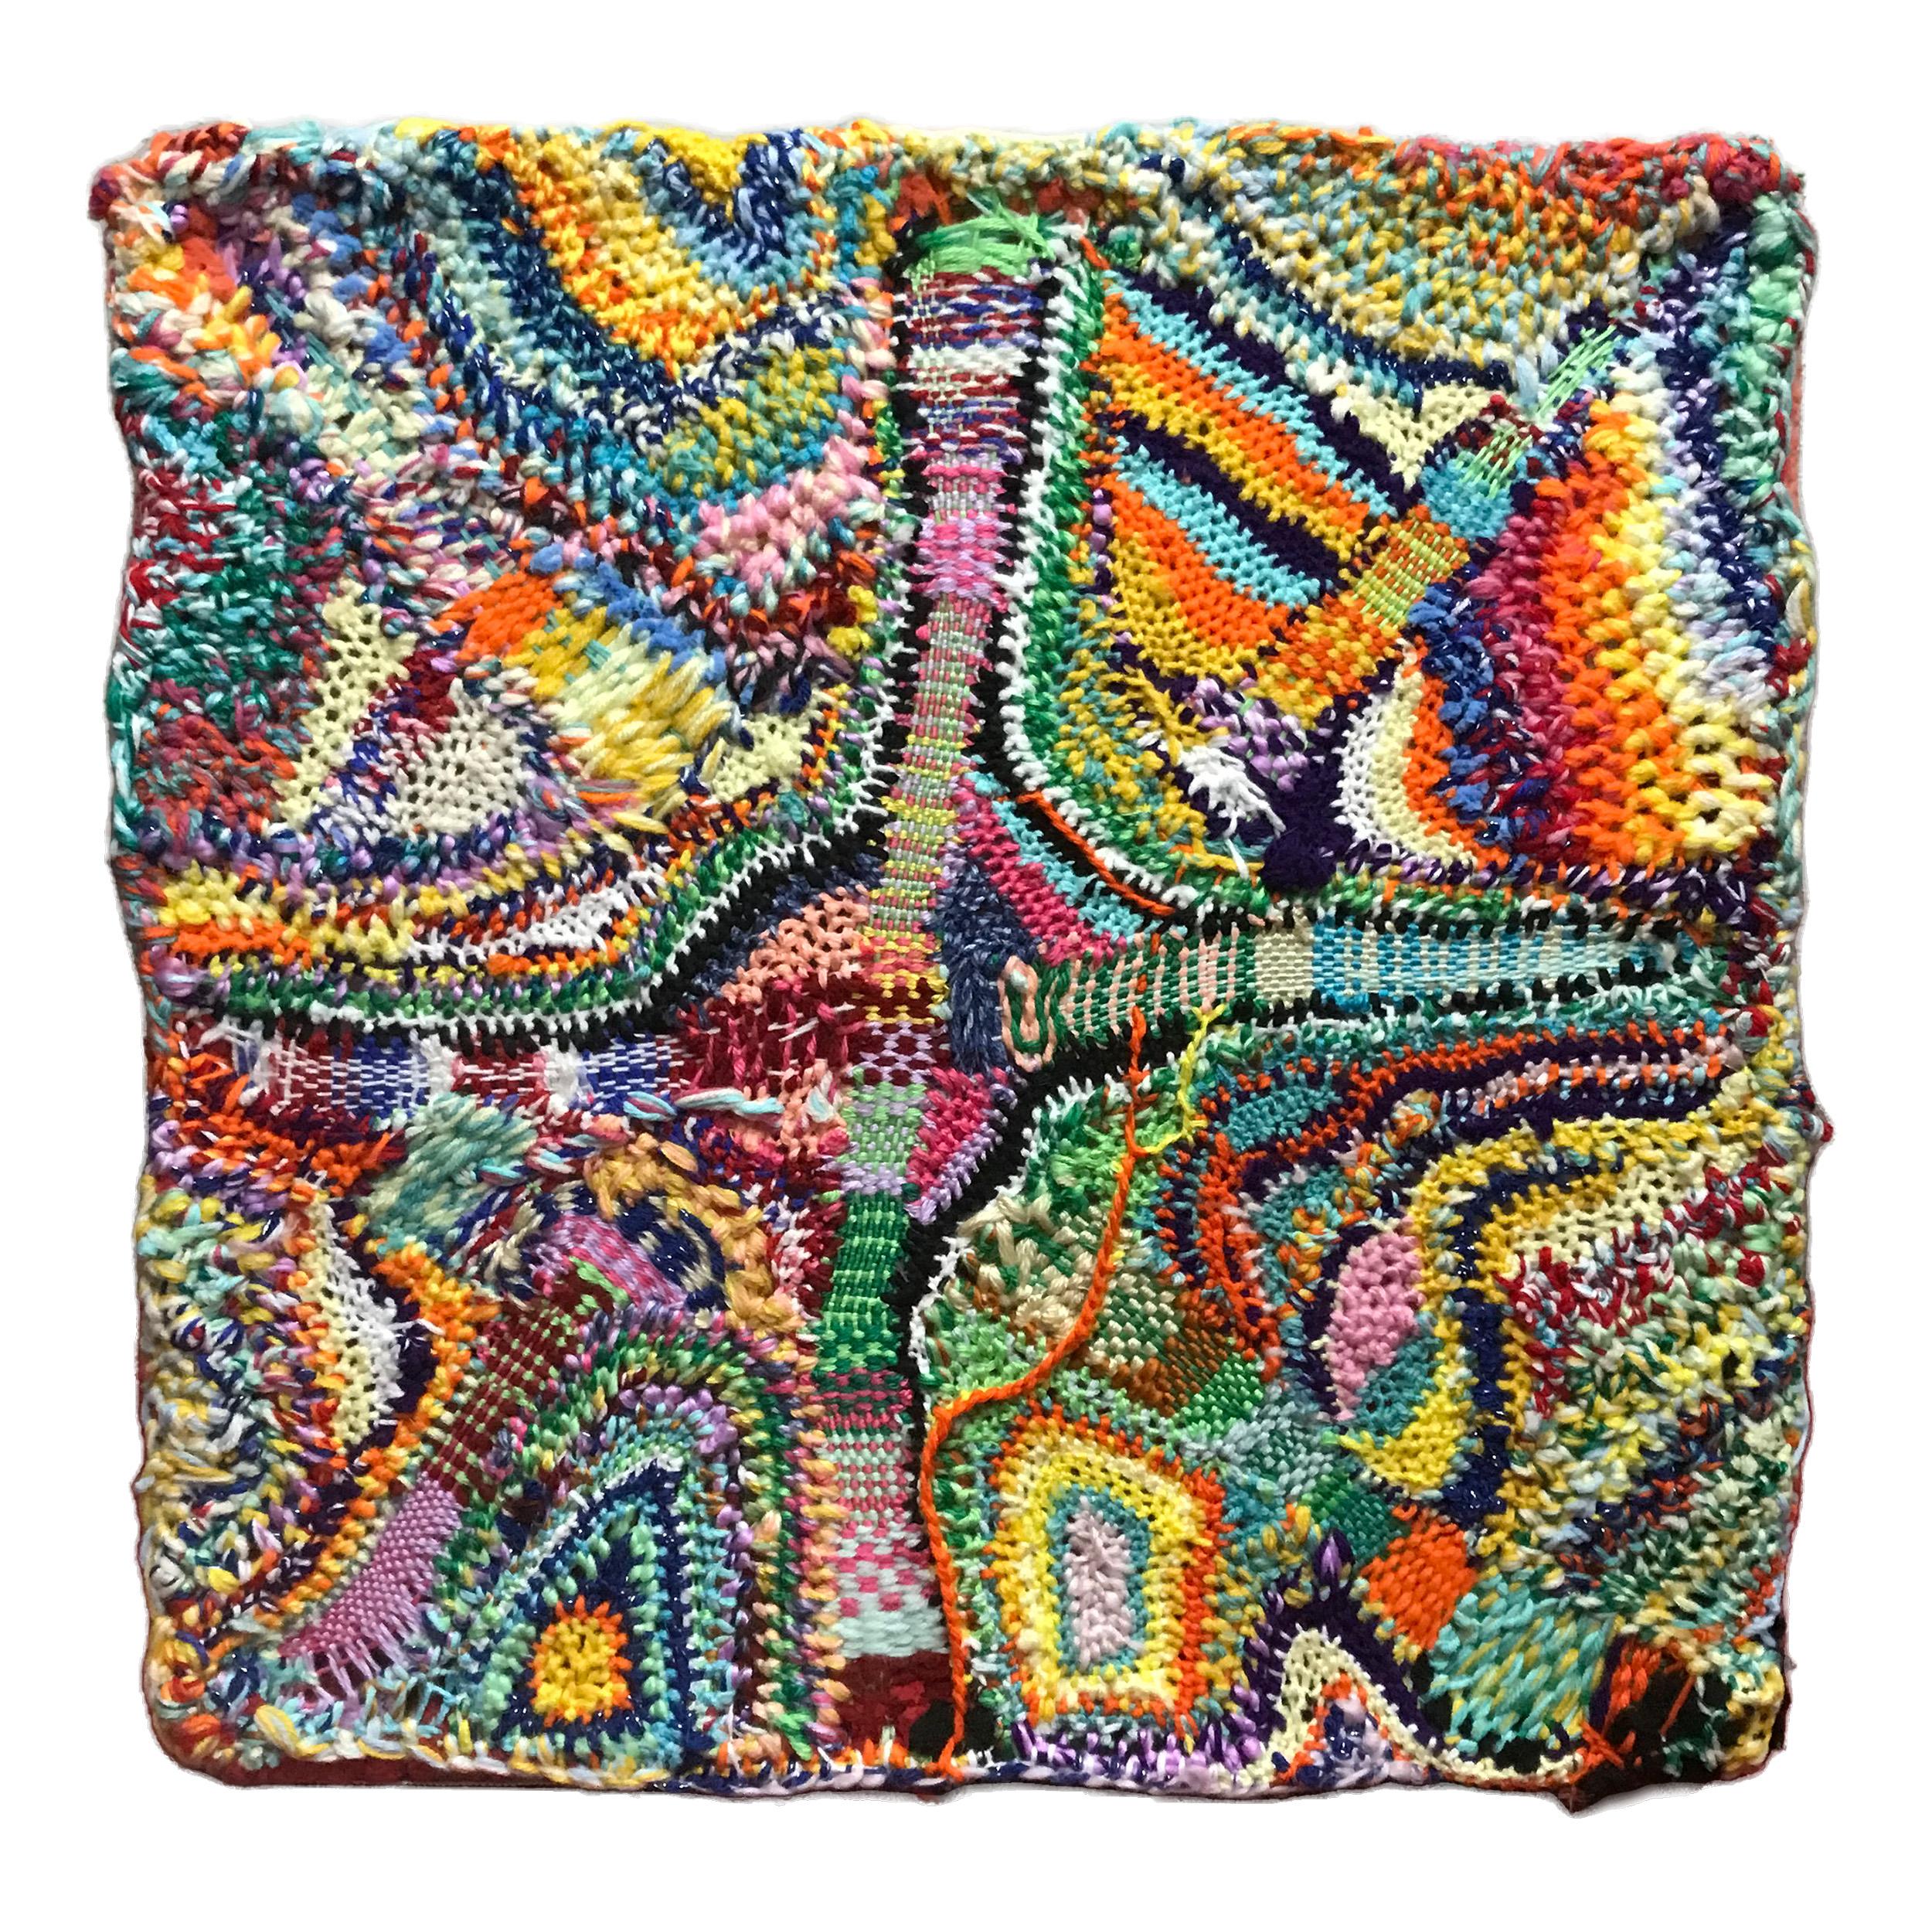 Ethan Meyer Abstract Sculpture - "Glossolalia", Contemporary, Woven, Fiber, Wall Hanging, Stretched, Abstract